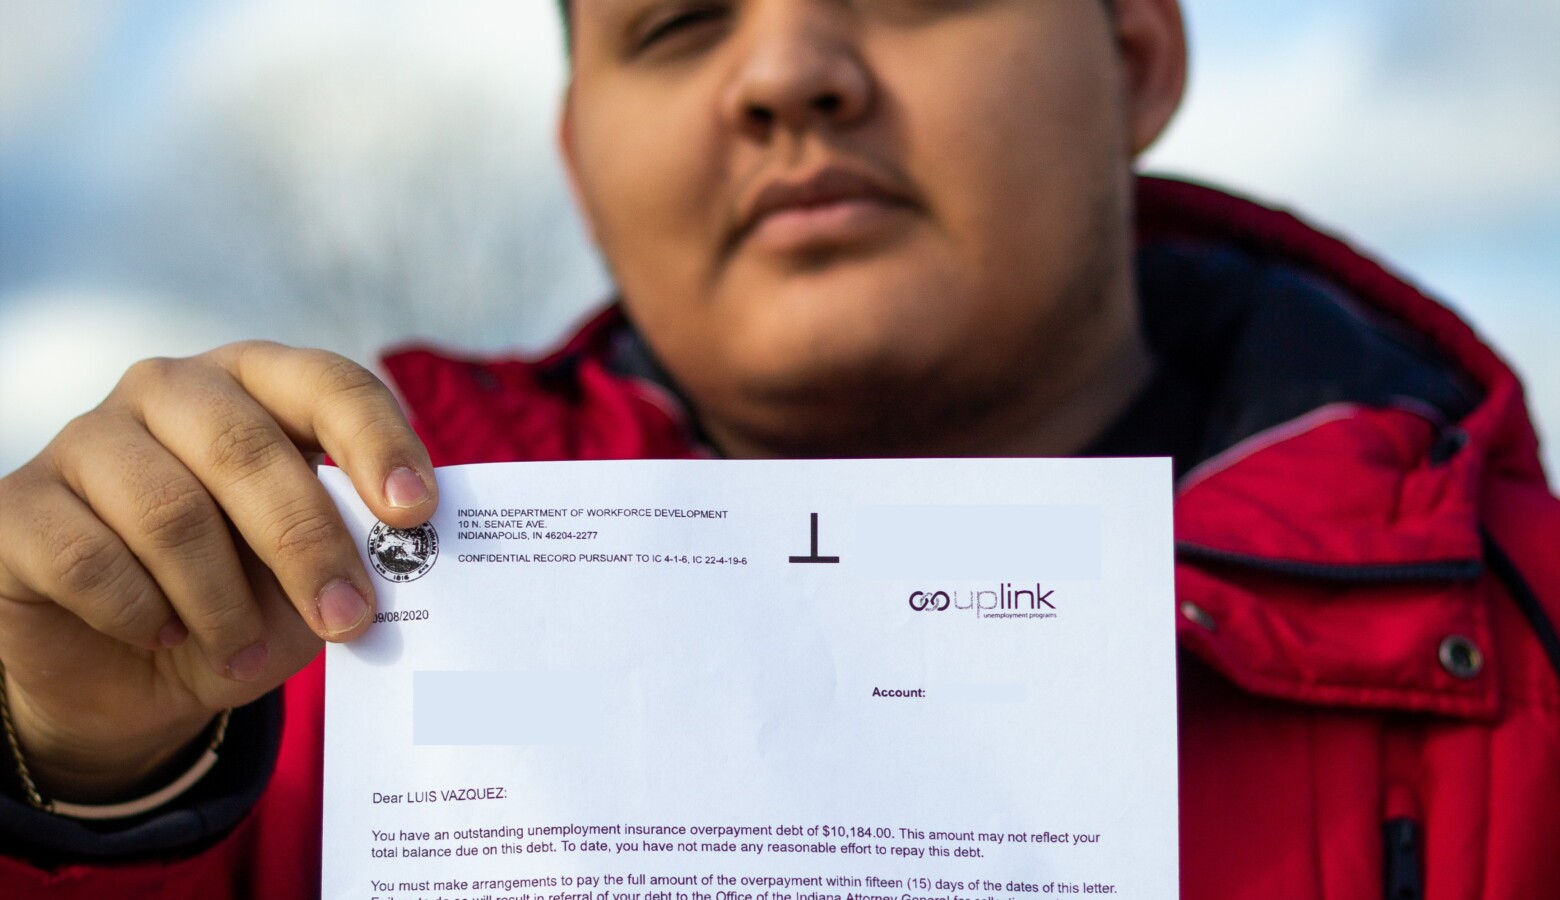 Luiz Vazquez holds a letter from the Department of Workforce Development saying he owes back over $10,000 in unemployment benefits. (Alan Mbathi/IPB News)